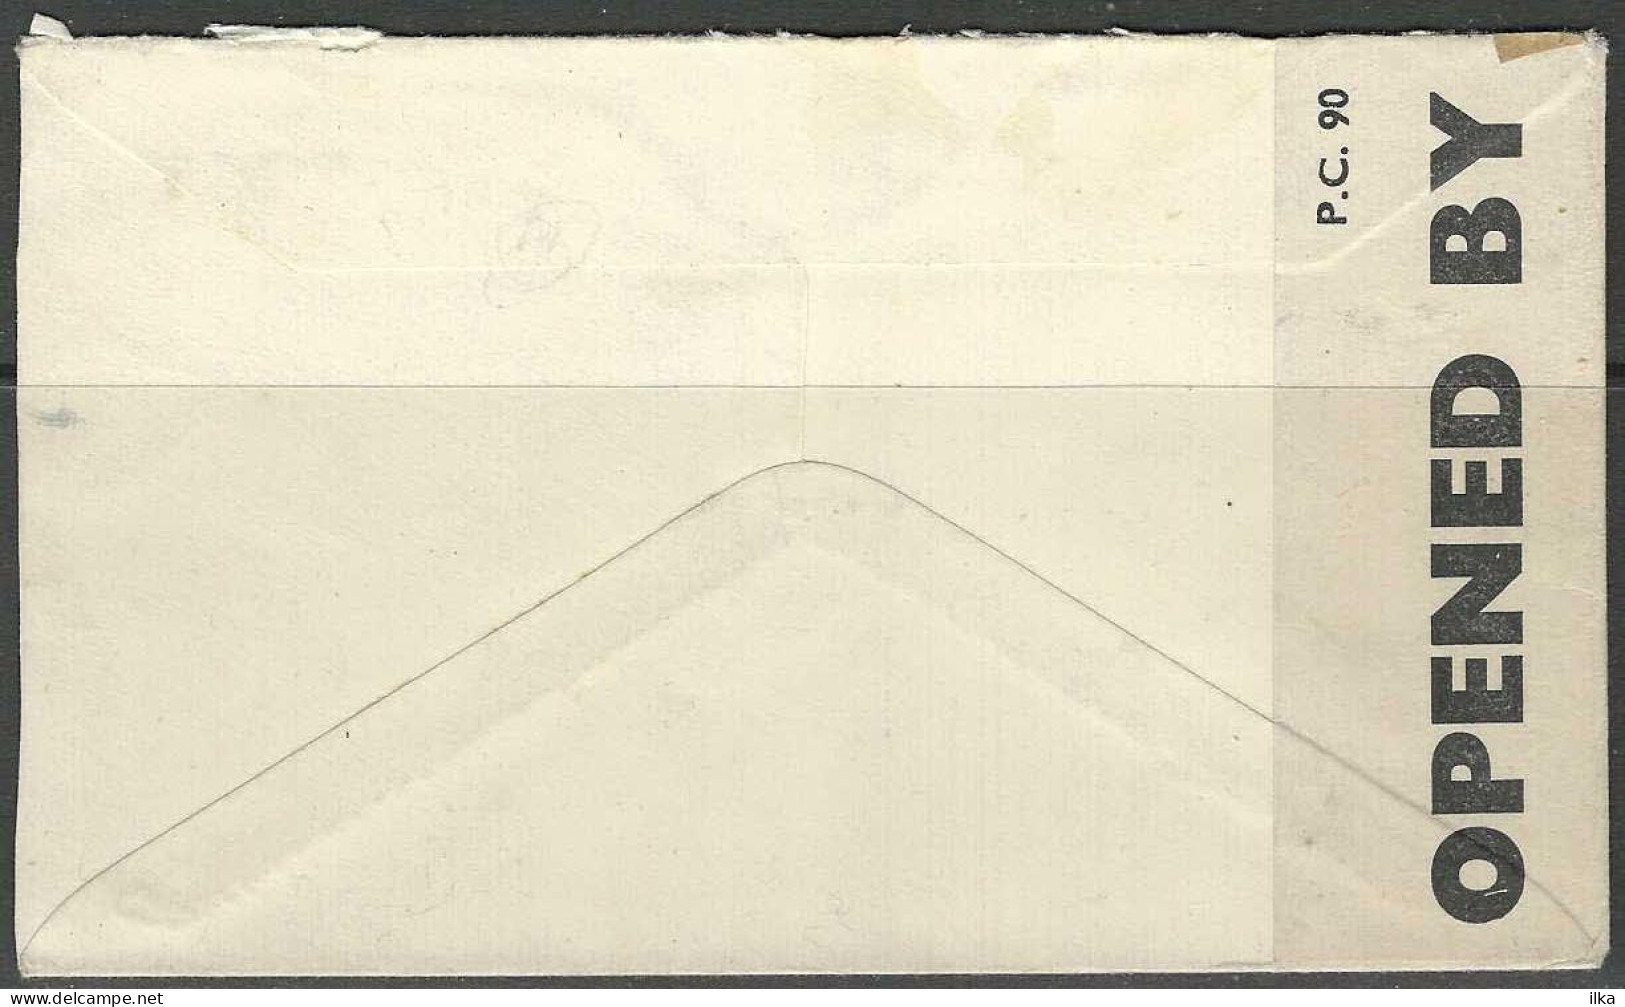 Cover - YT 2x N°599 - Afg./Obl. Porto - 4° Sector 13/09/1941. Contrôle Postal >> South Wales - Gt. Britain. By Air. Mail - Lettres & Documents